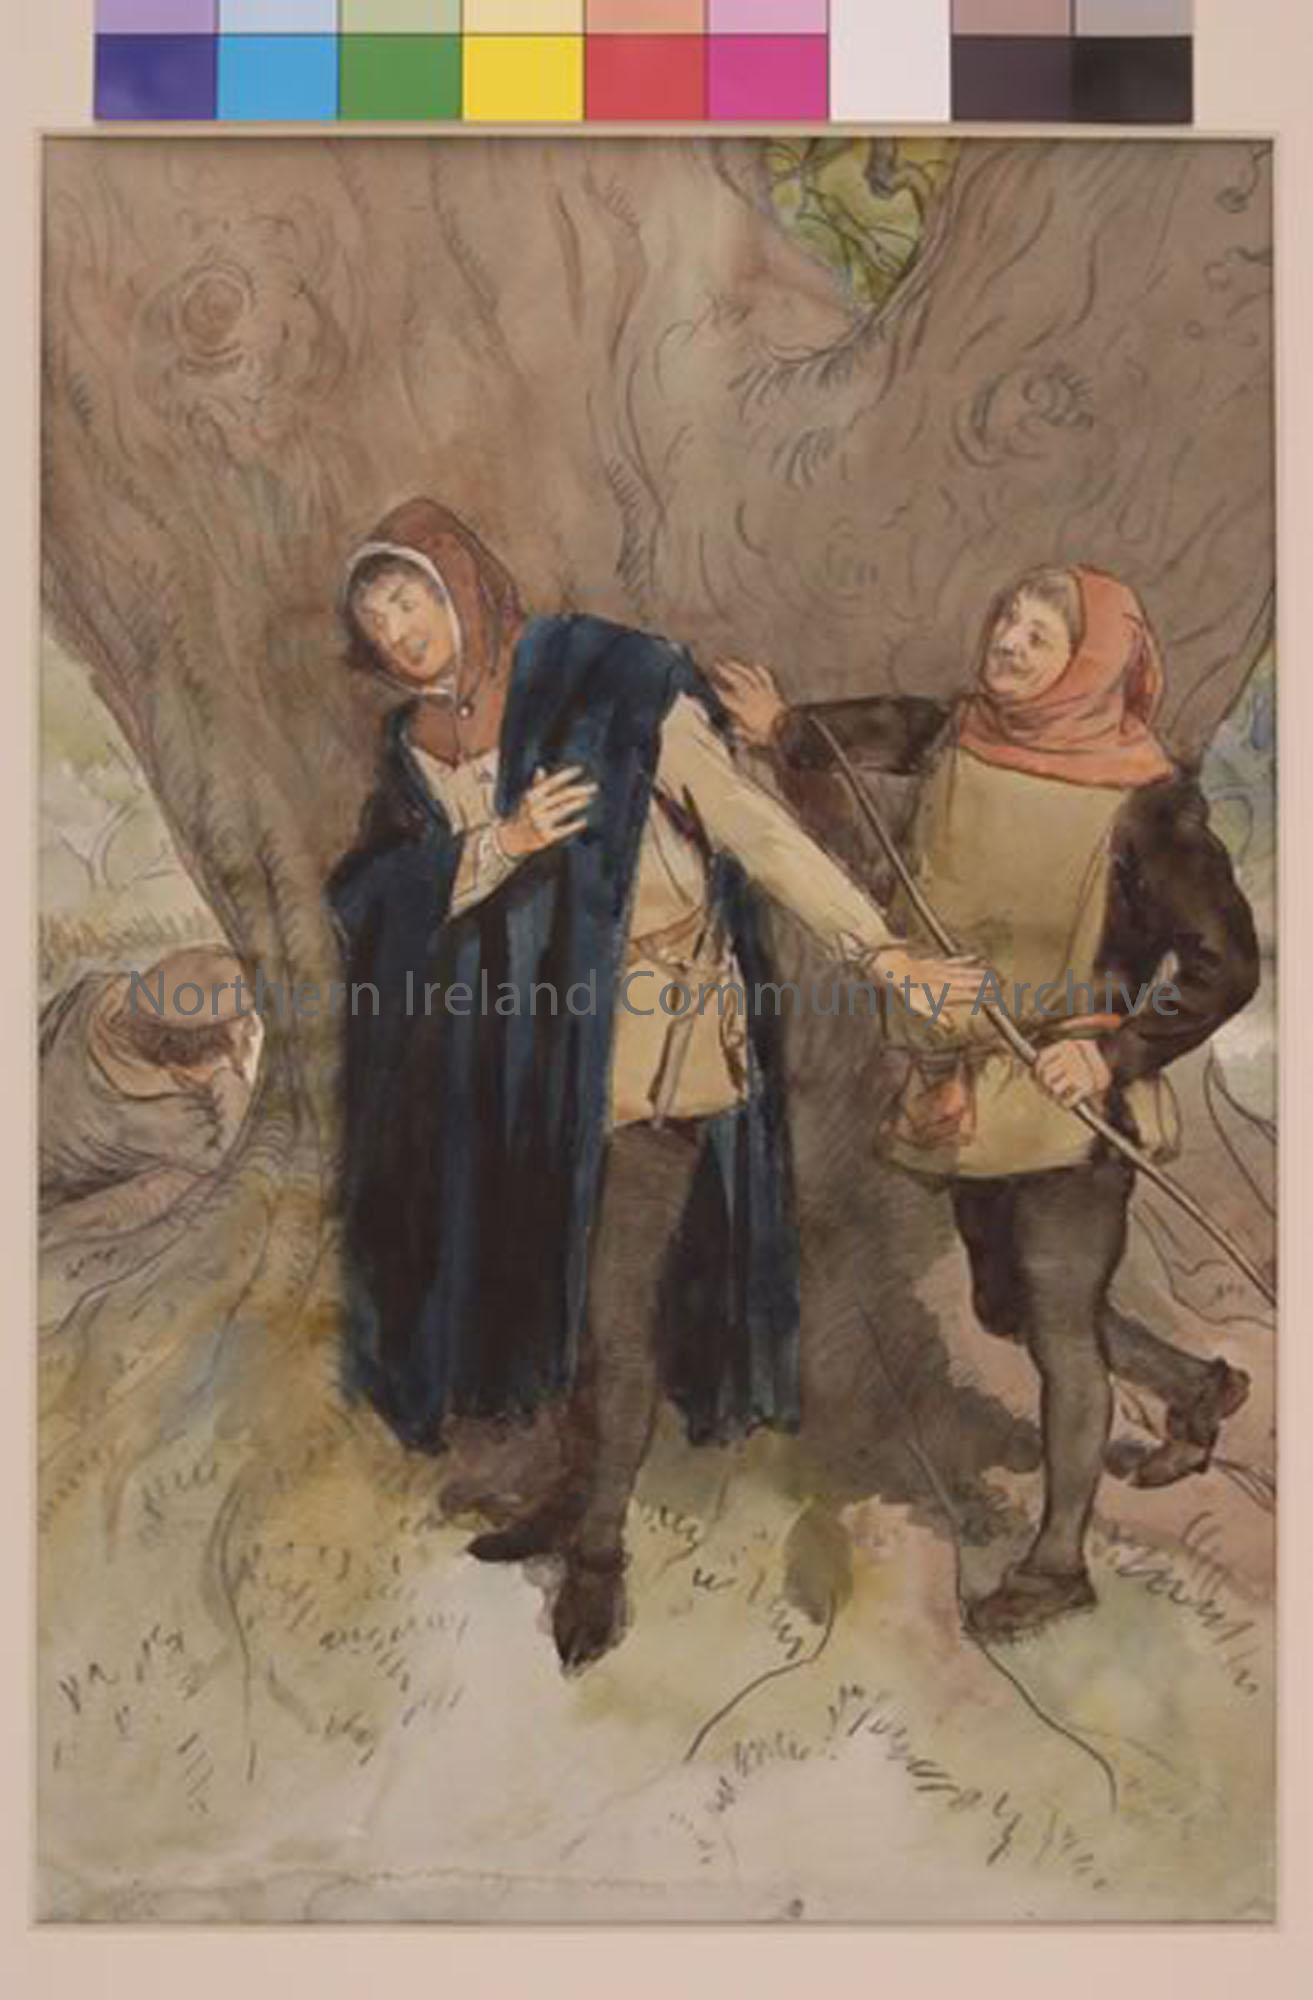 Watercolour study by Hugh Thomson for William Shakespeare’s ‘As You Like It’ (5659)